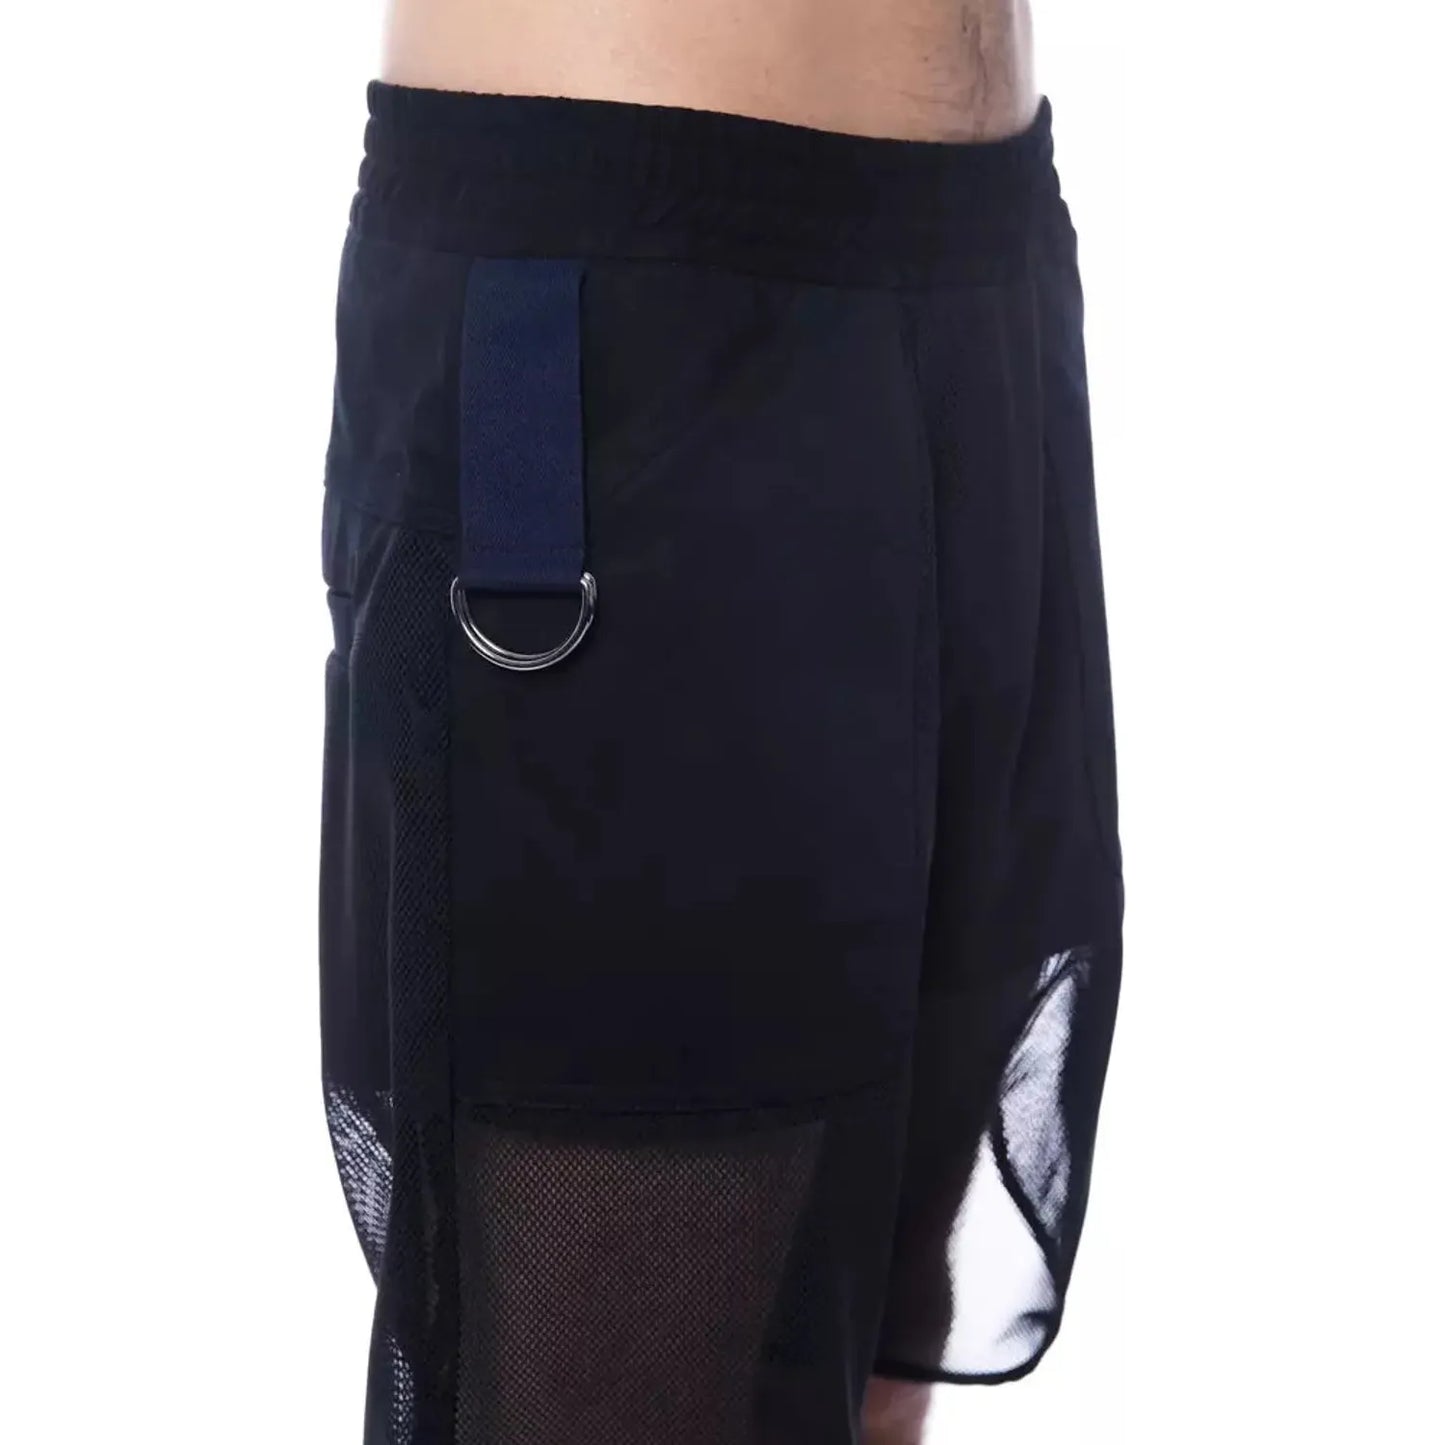 Nicolo Tonetto Elevate Your Style with Chic Transparent-Panel Shorts nero-black-short-1